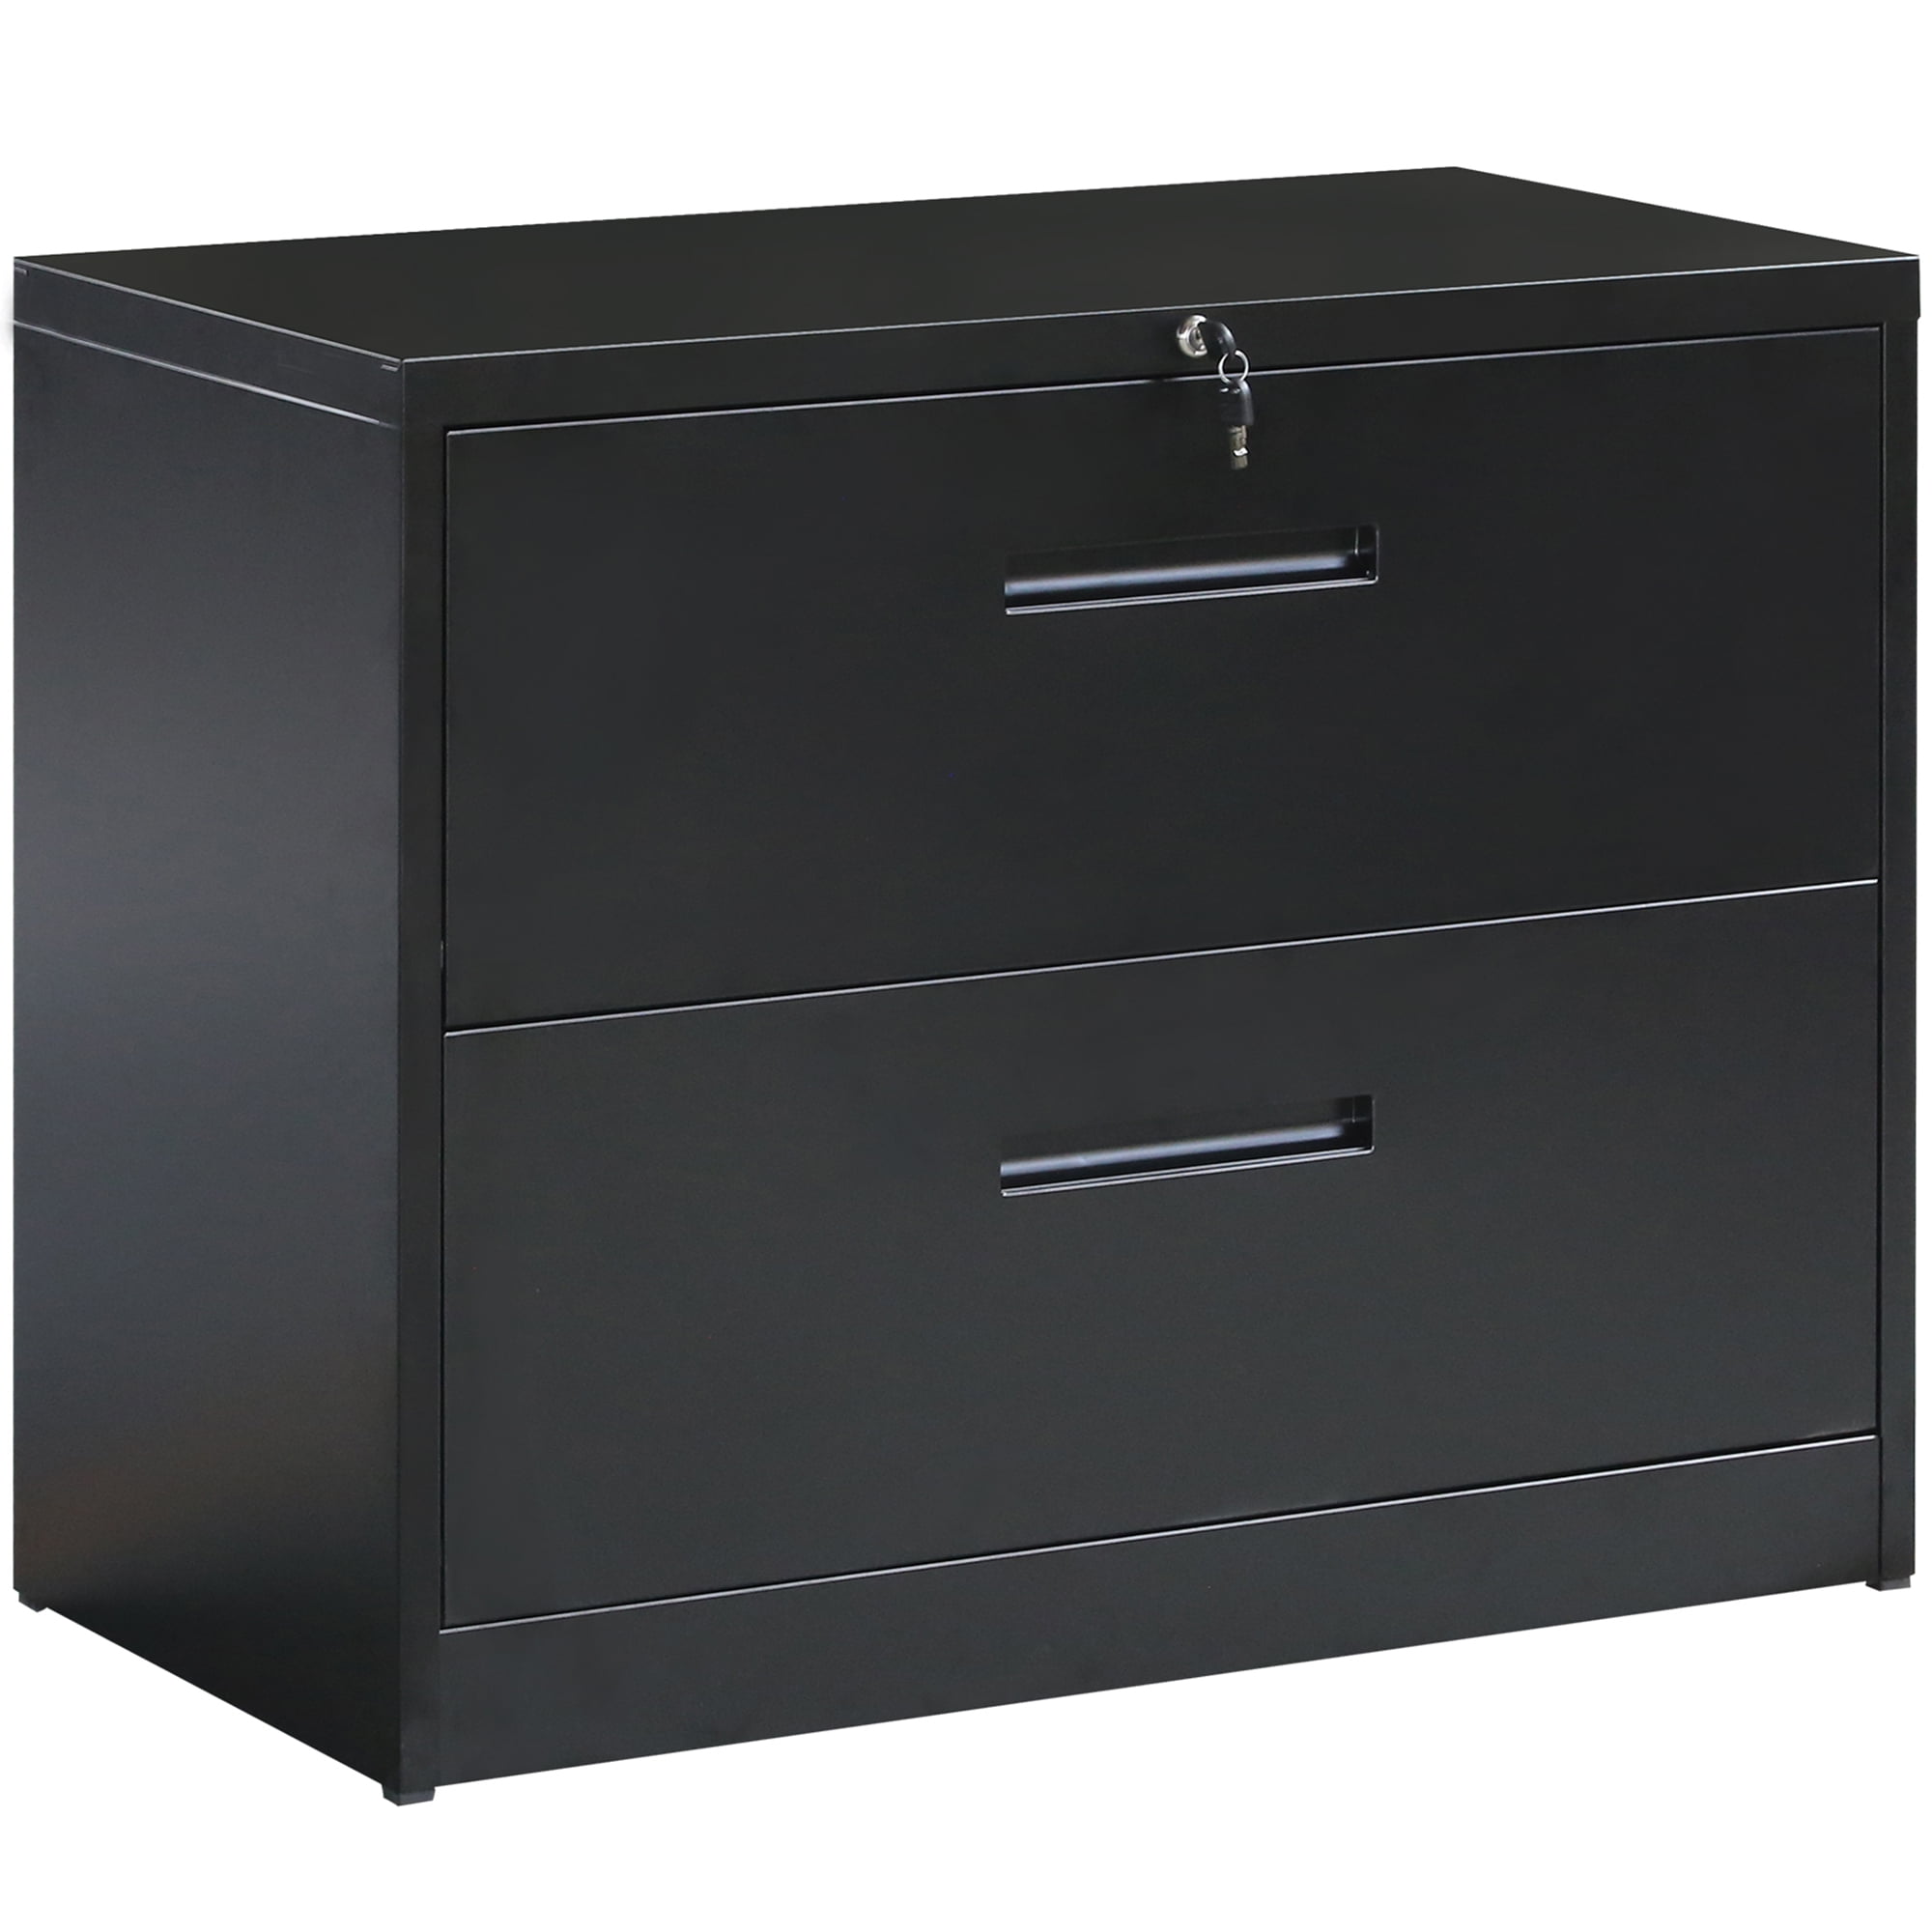 Lateral File Cabinet With 2 Drawers, Locking Filing Cabinets For Home